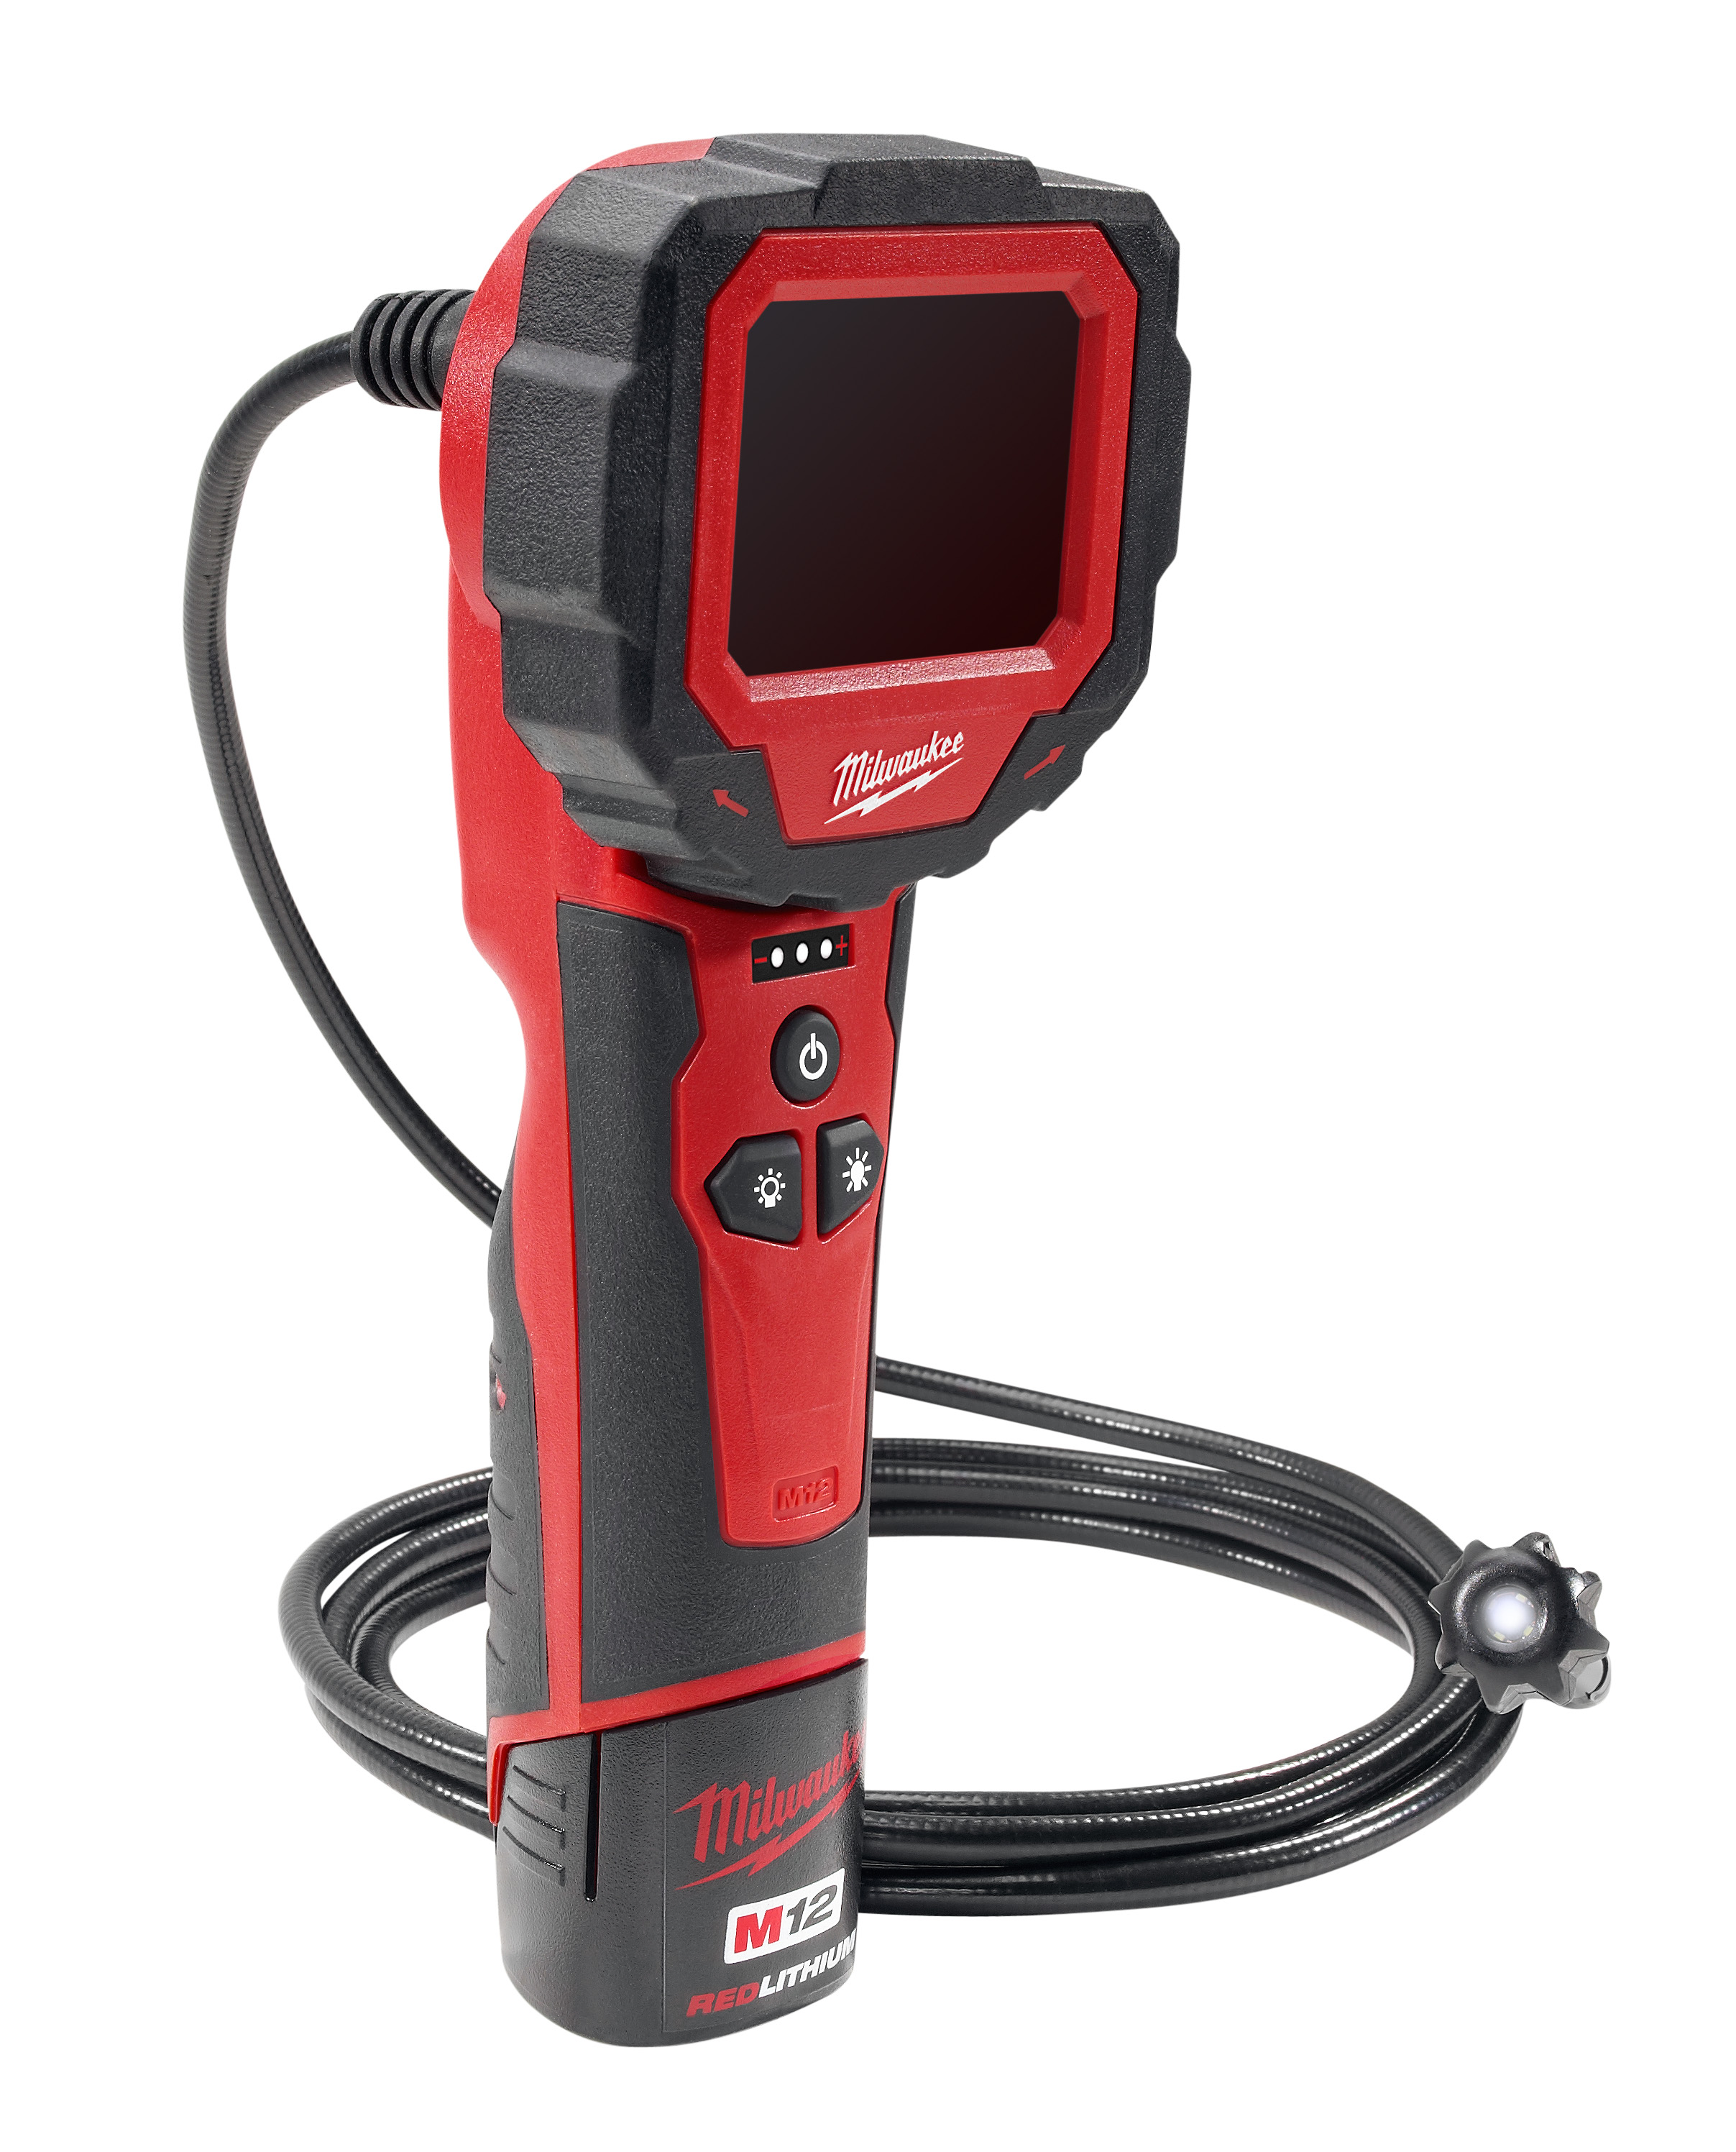 2314-21 045242268054 The Milwaukee 2314 - 21 M-Spector 360™ rotating inspection scope features a ground-breaking rotating display enabling the user to orient the image without having to fight the cable. With a dense 640 x 480 digital image sensor and 4 LED lights, the M-Spector 360™ delivers best in class image quality without shadows or glare. Understanding the need to inspect at greater distances and around corners, the 2314 - 21 M-Spector 360™ features a 9 ft. cable with a pipe guide. Now the user can enjoy easy pipe navigation without the need for extensions. The larger 2.7 in. LCD display and 9 mm aluminum head provide easy viewing in the tightest of spaces, while optional accessories that attach to the cable head add to the versatility. With unmatched image control, clarity and brightness, the Milwaukee 2314 - 21 M-Spector 360™ delivers a unique solution to improve the productivity of any professional.